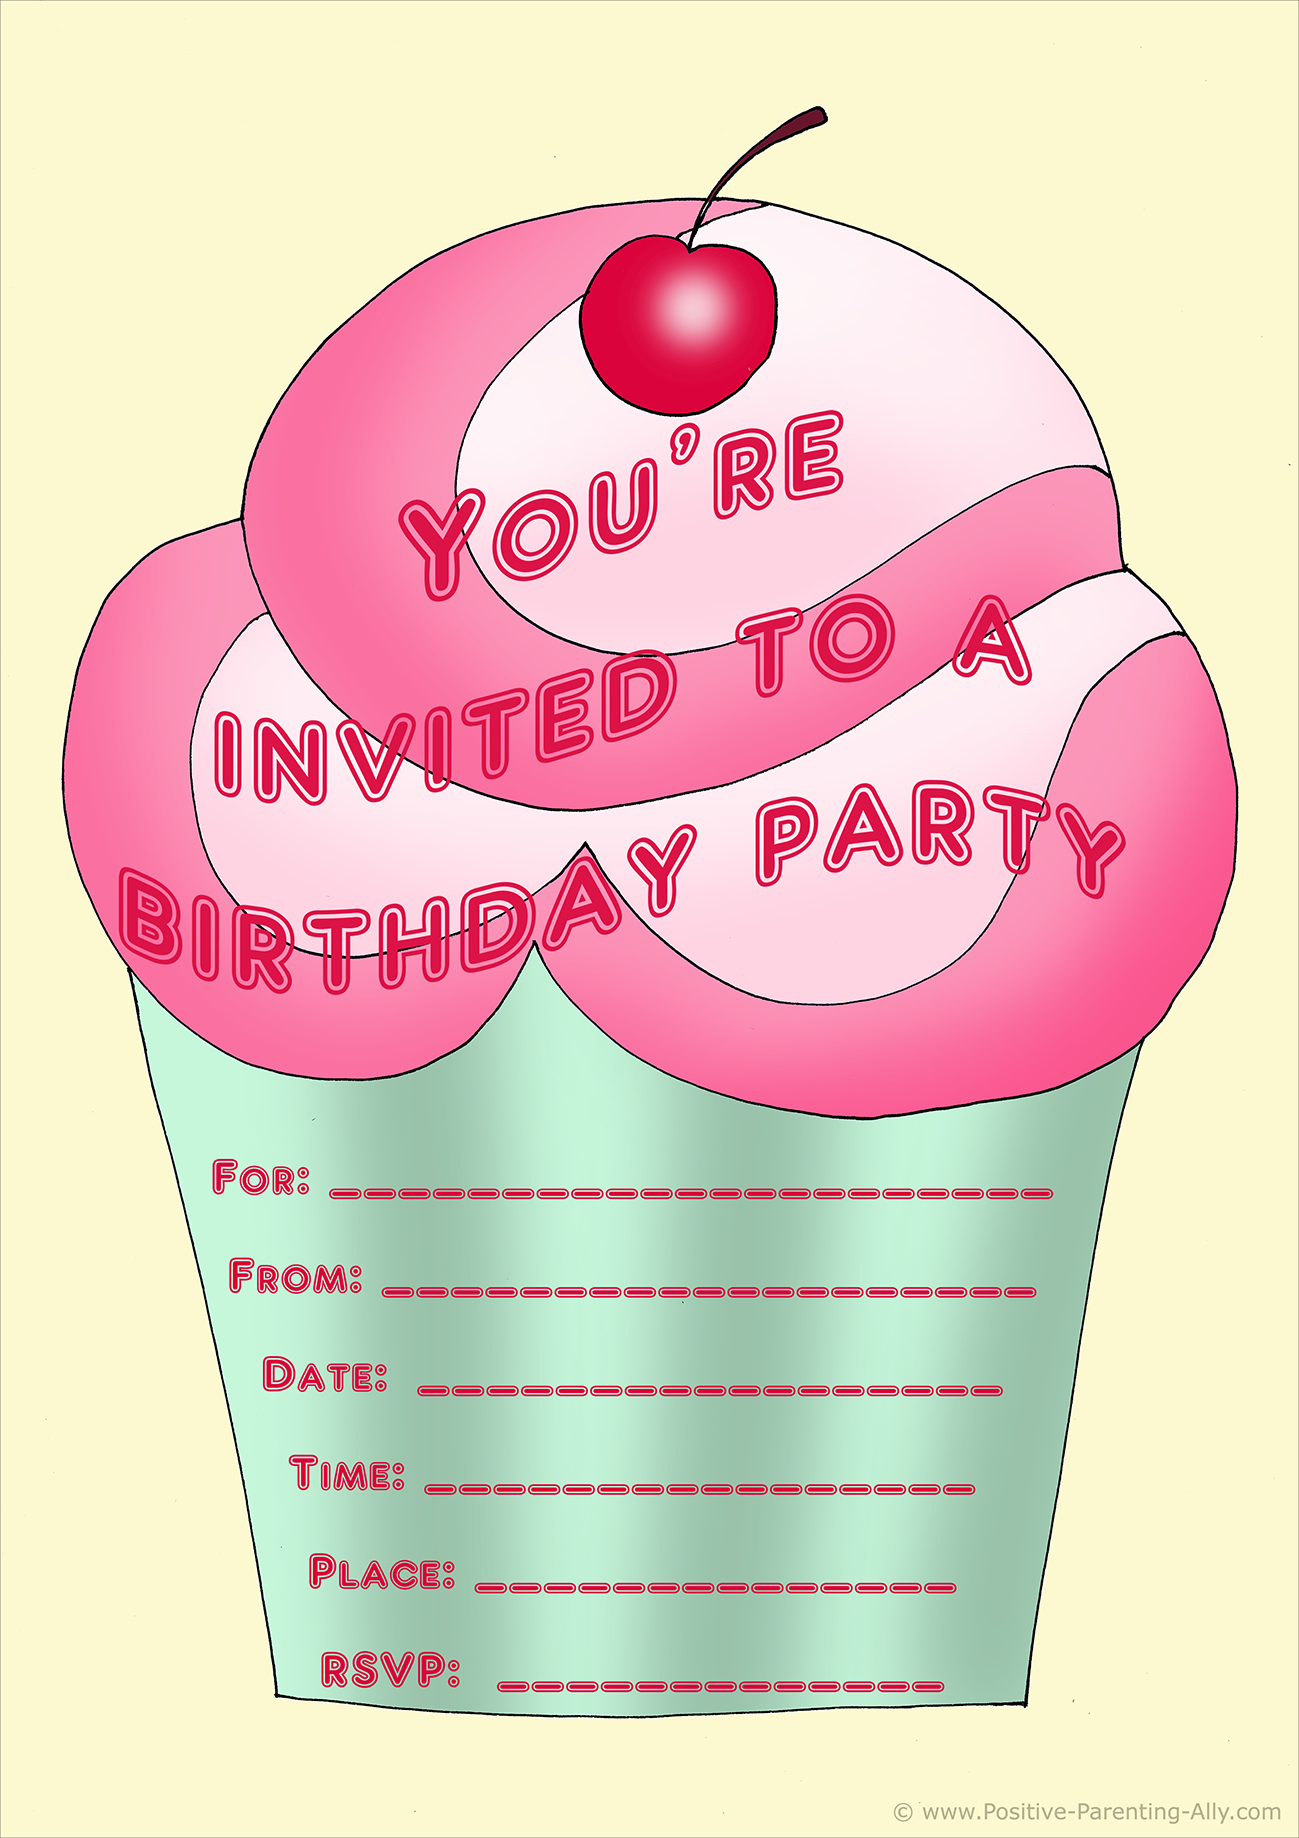 Free Birthday Party Invites For Kids In High Print Quality pertaining to Free Printable Girl Birthday Party Invitations